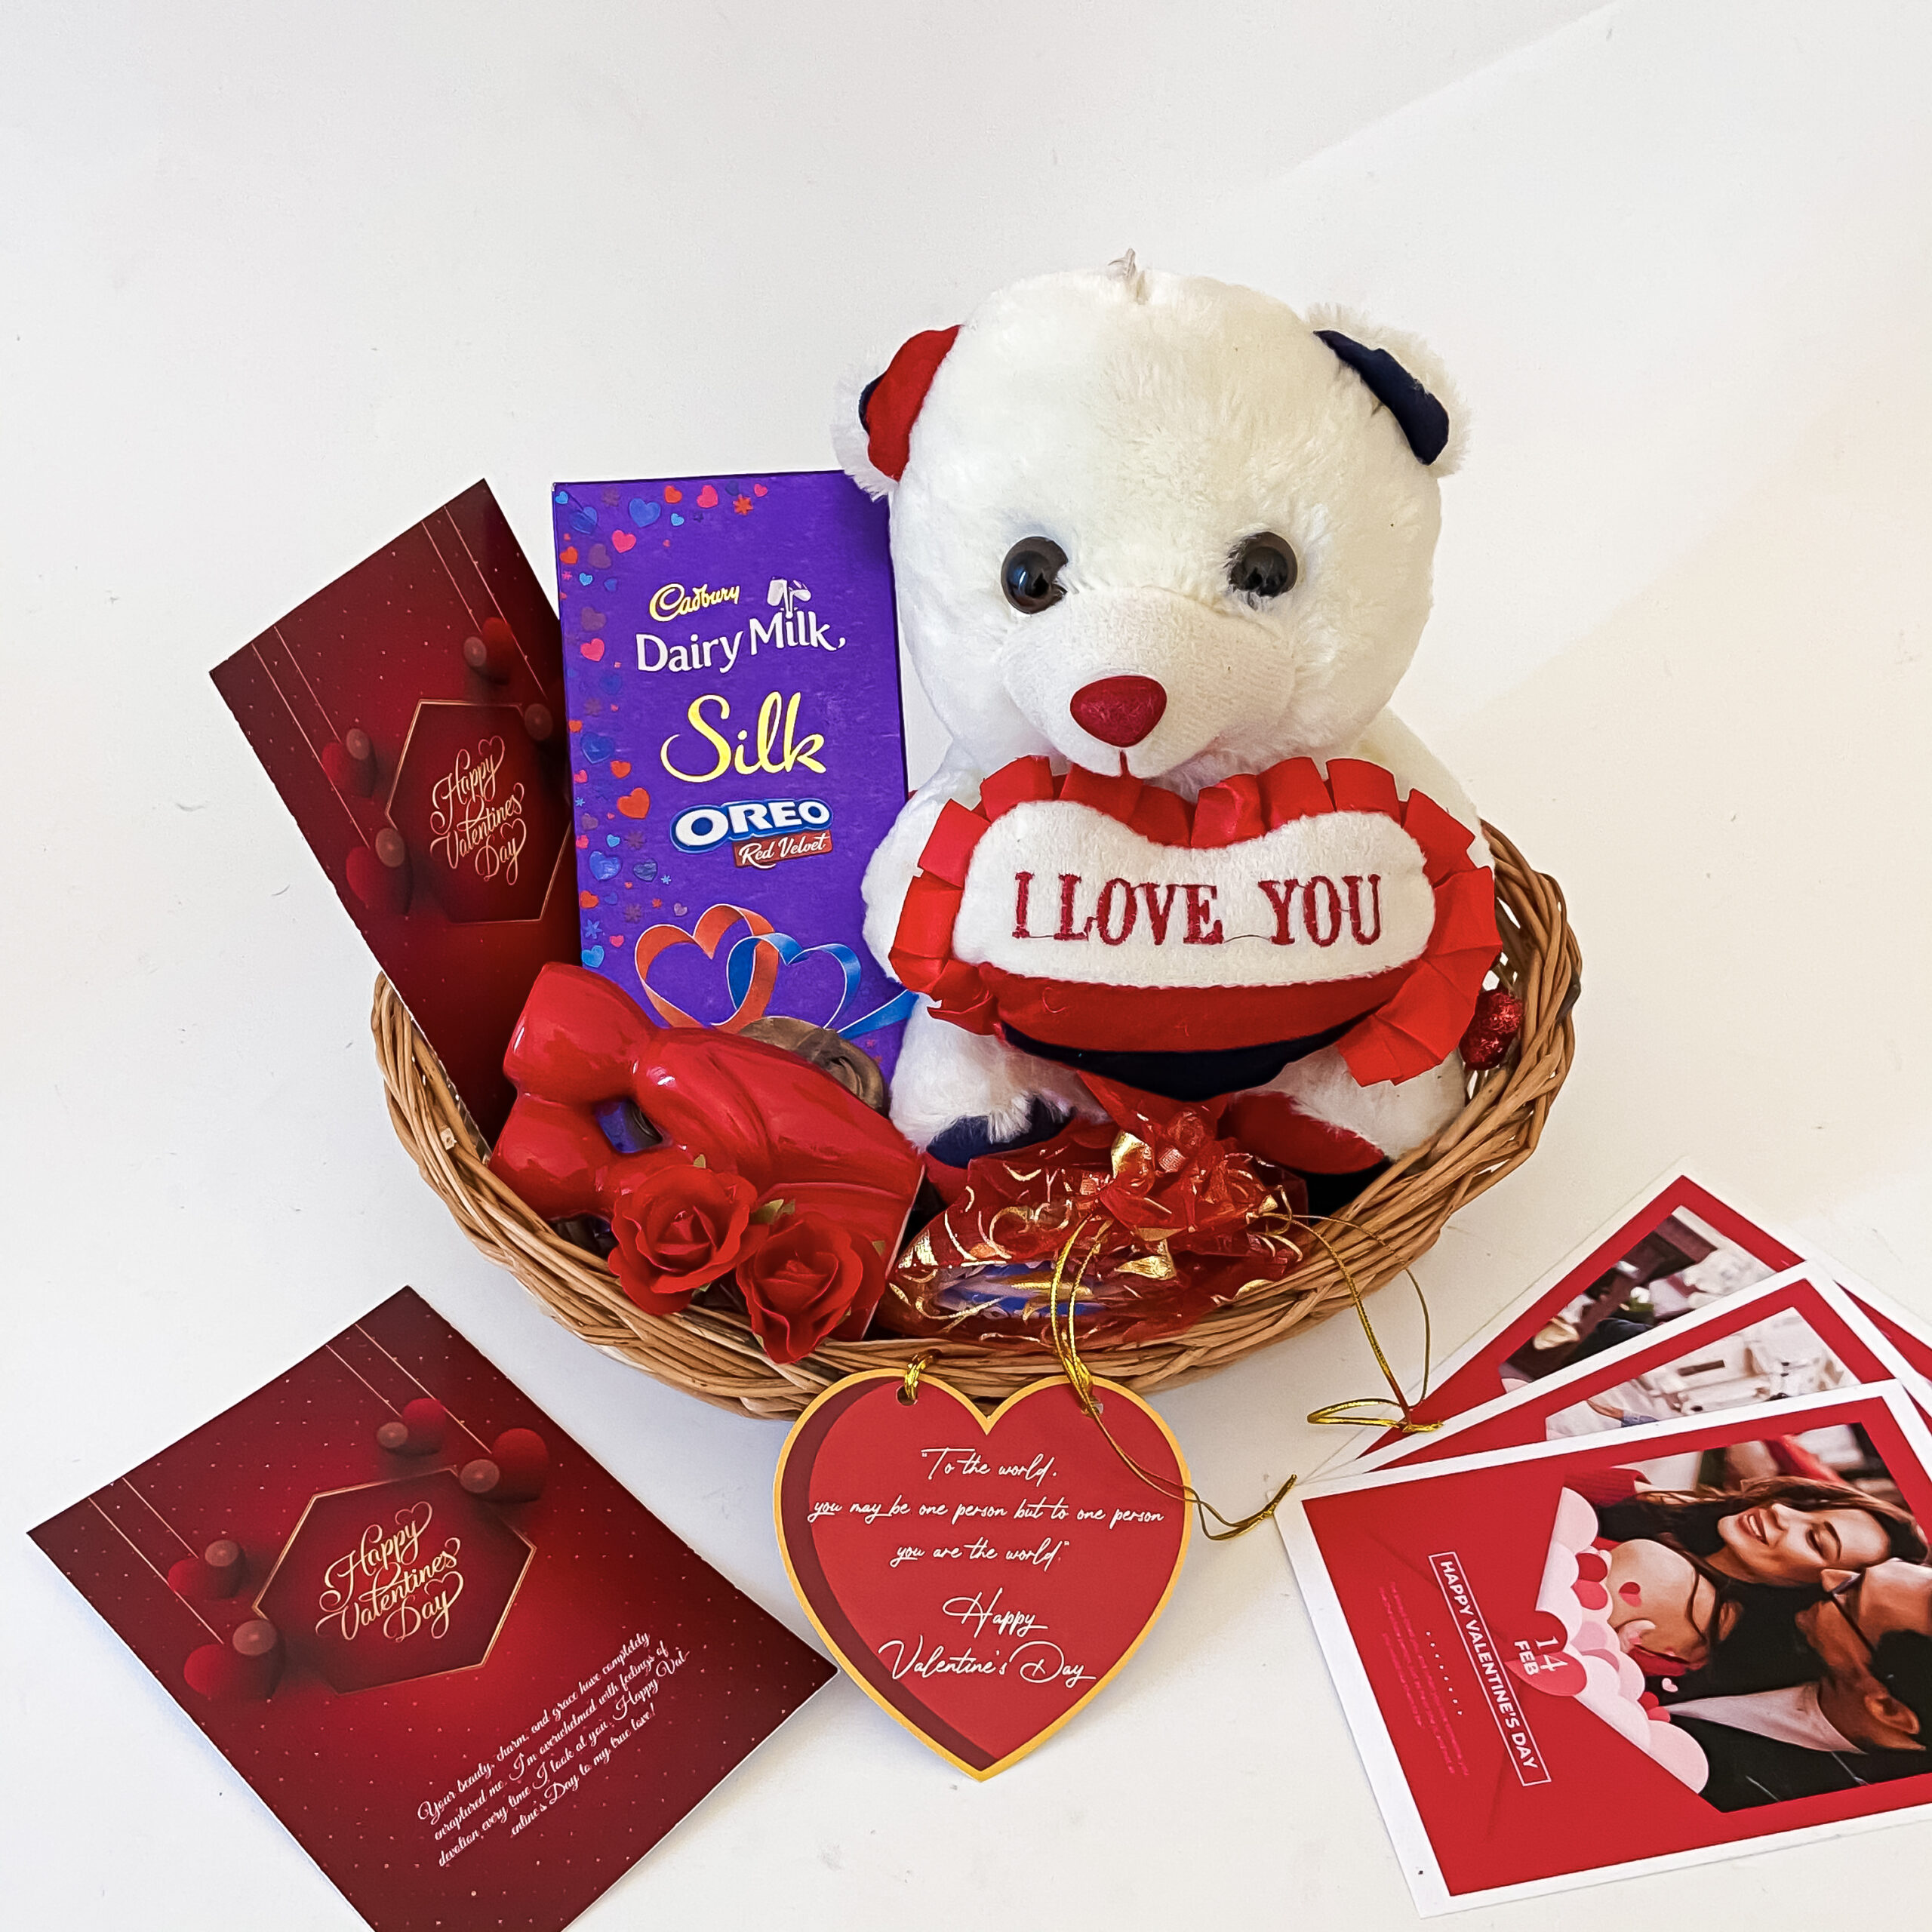 Top Five Valentine's Day Gifts to India – Lovenwishes Gifts To India